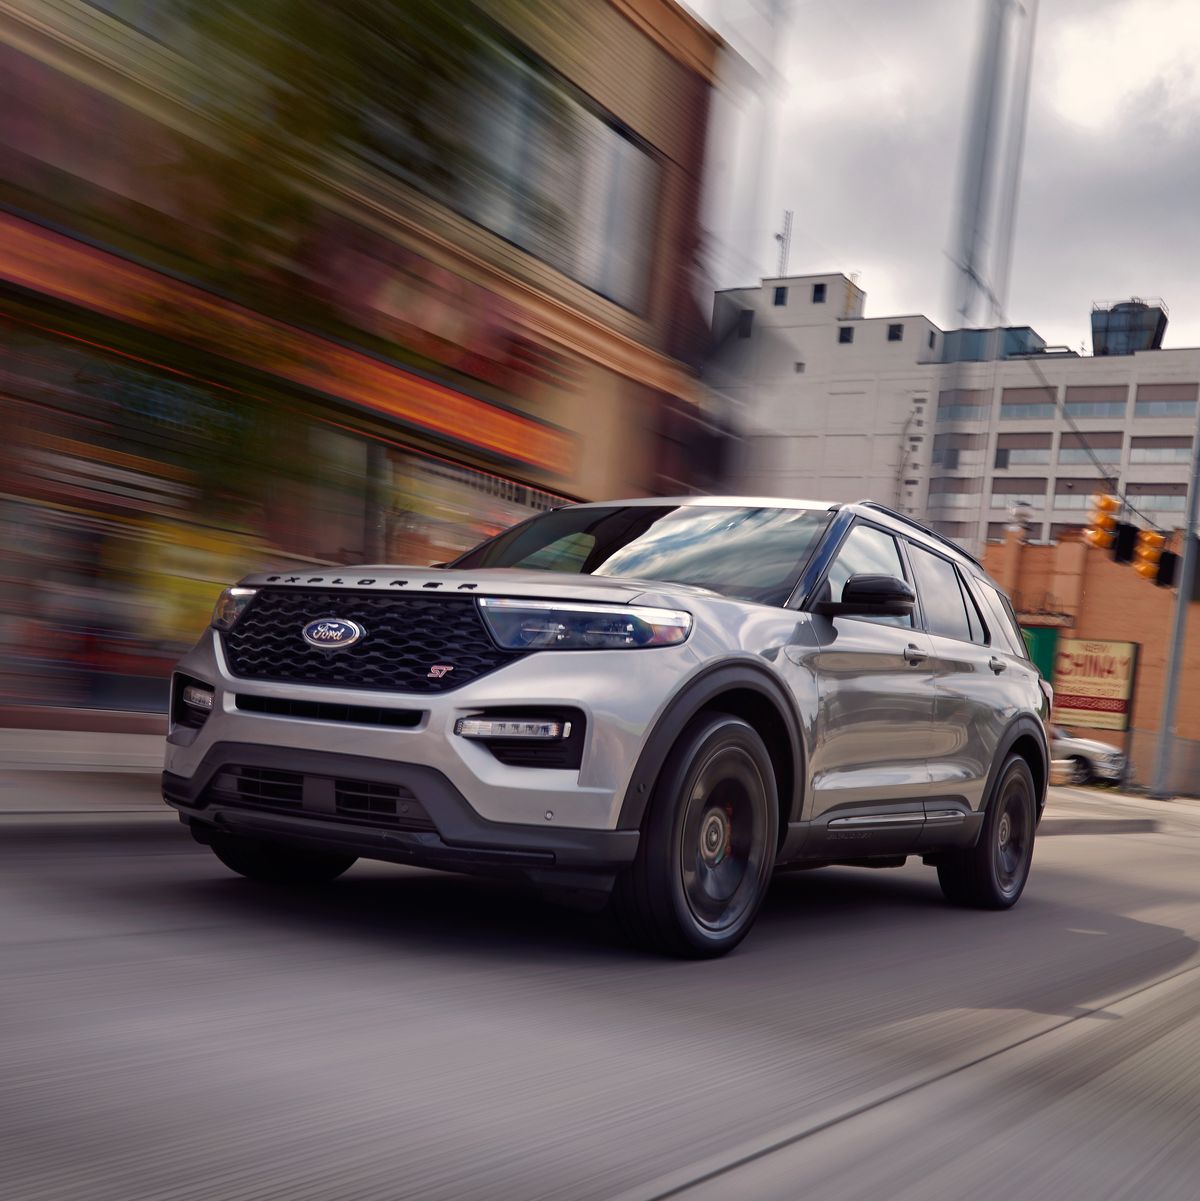 The 400-HP 2020 Ford Explorer ST Is Quick, Compelling, and Unexpected